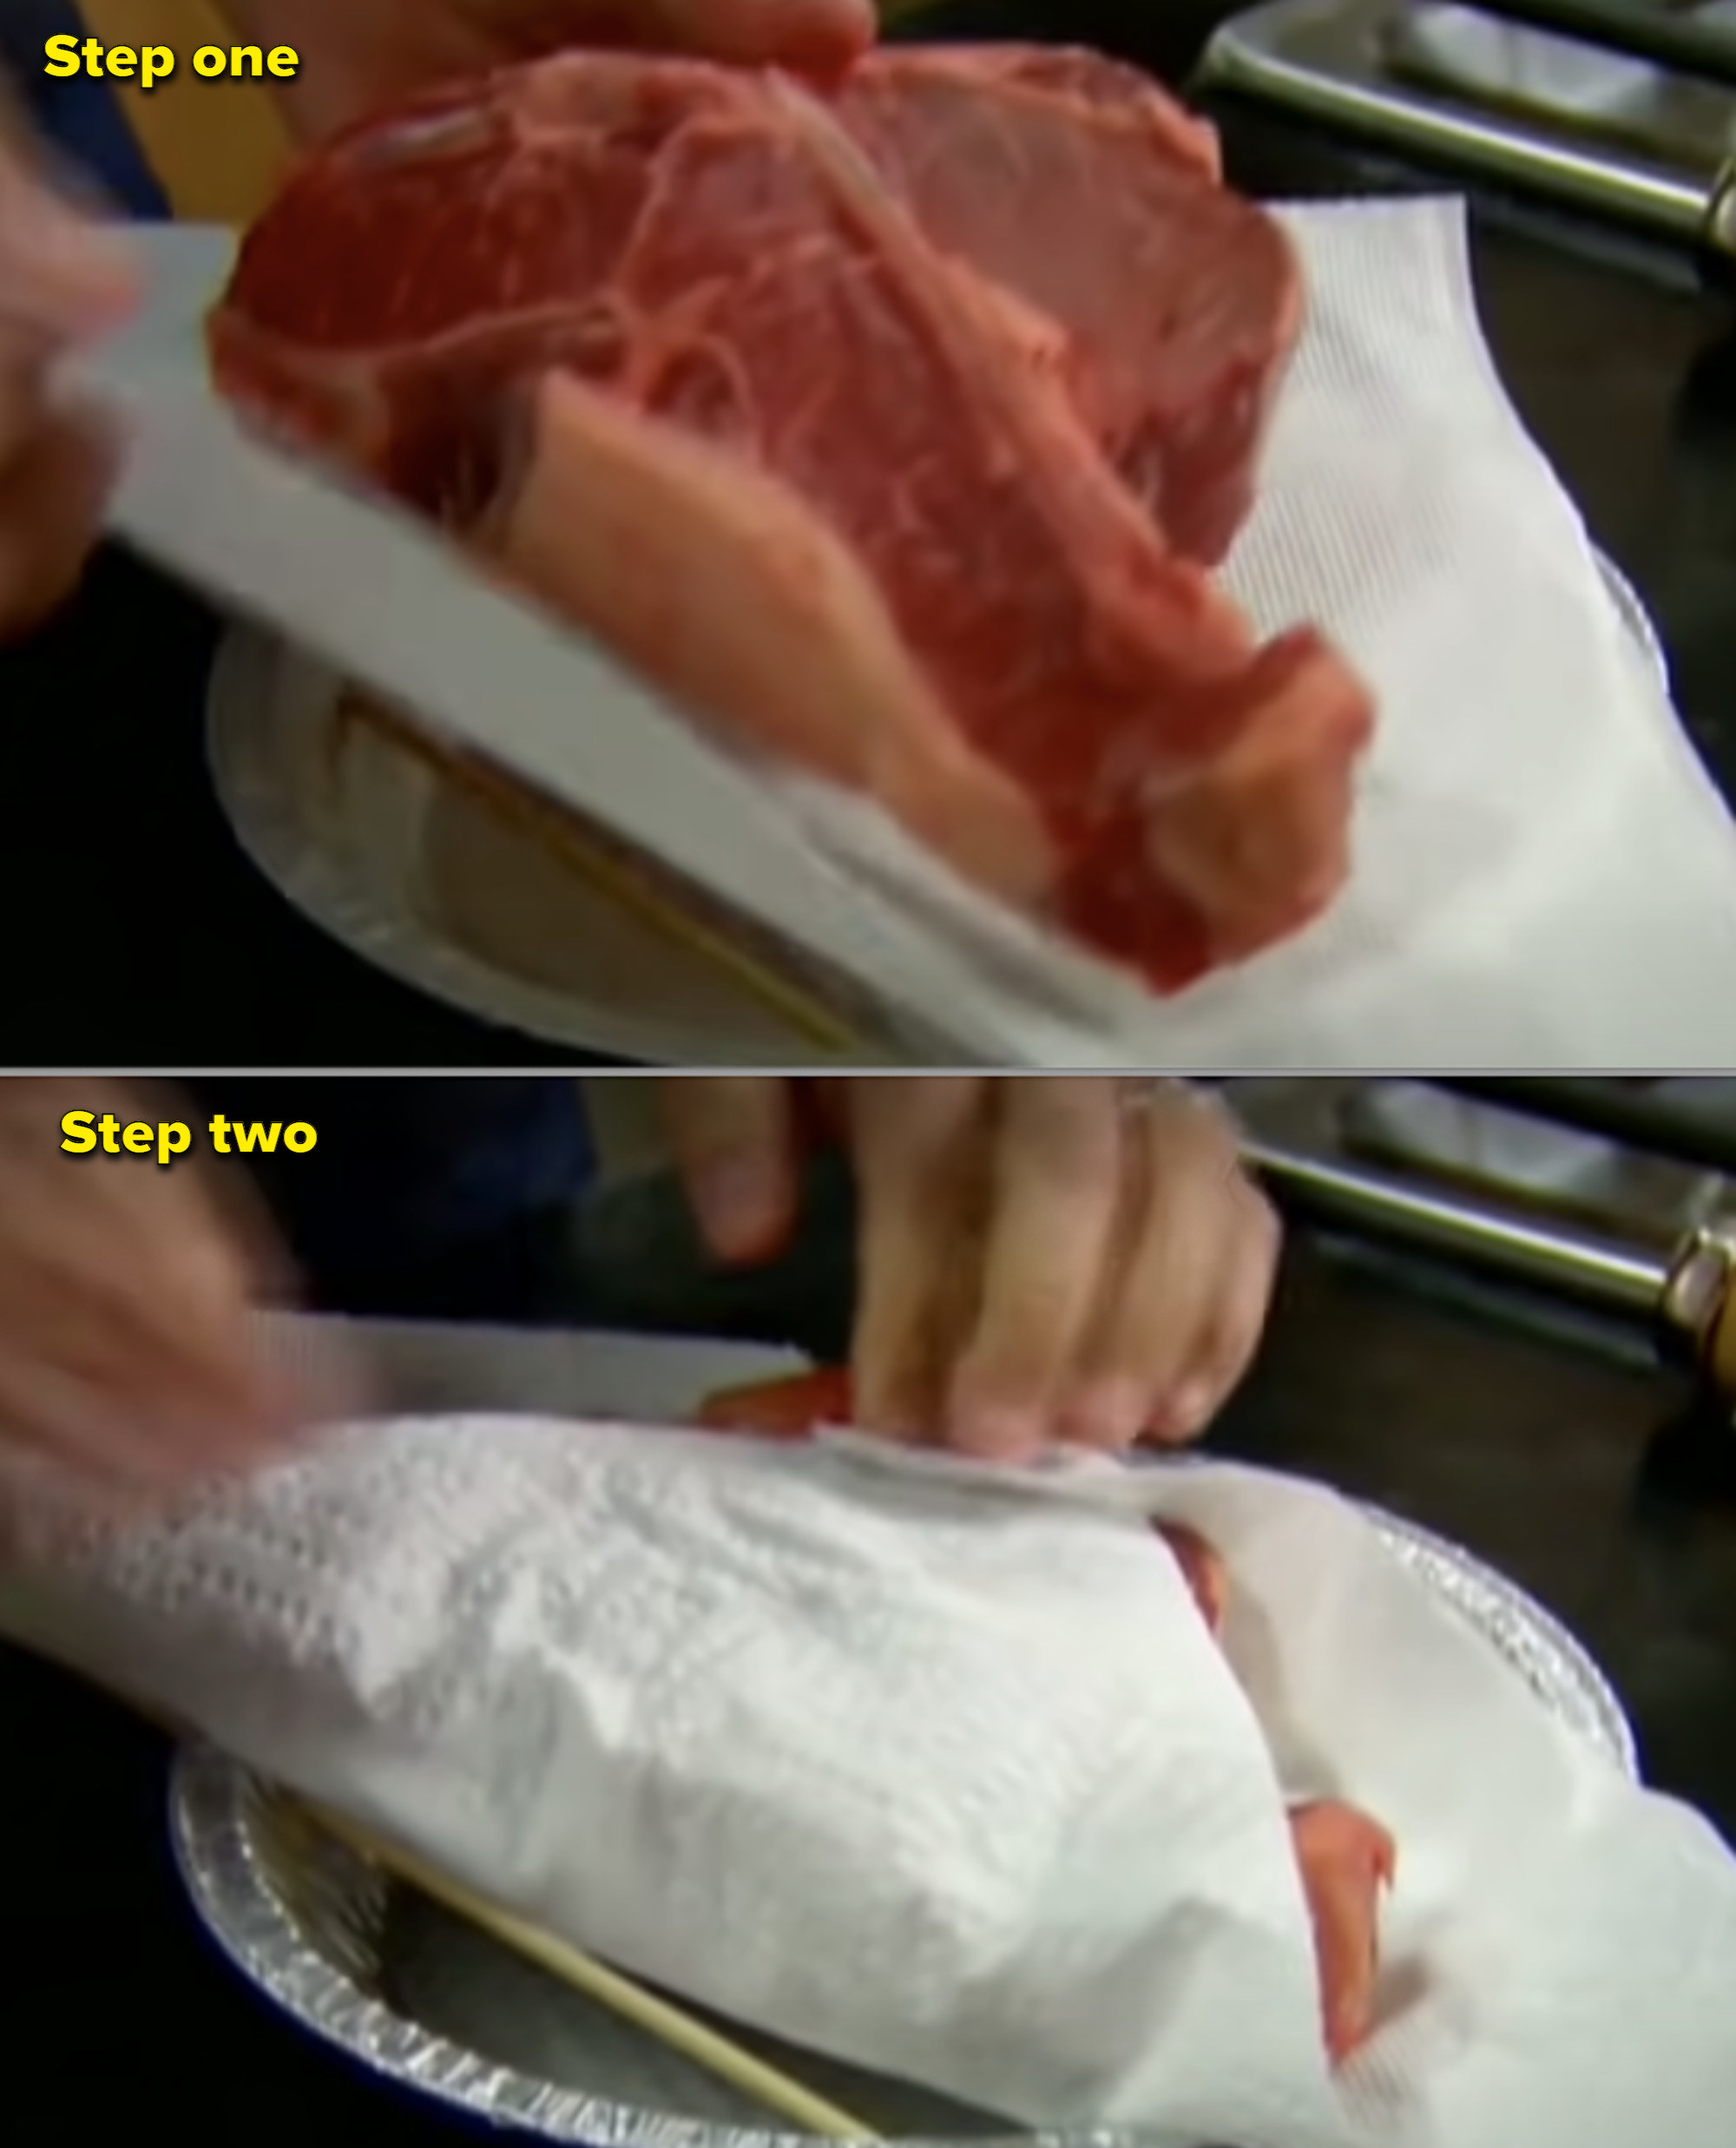 Alton Brown wrapping steak in a paper towel